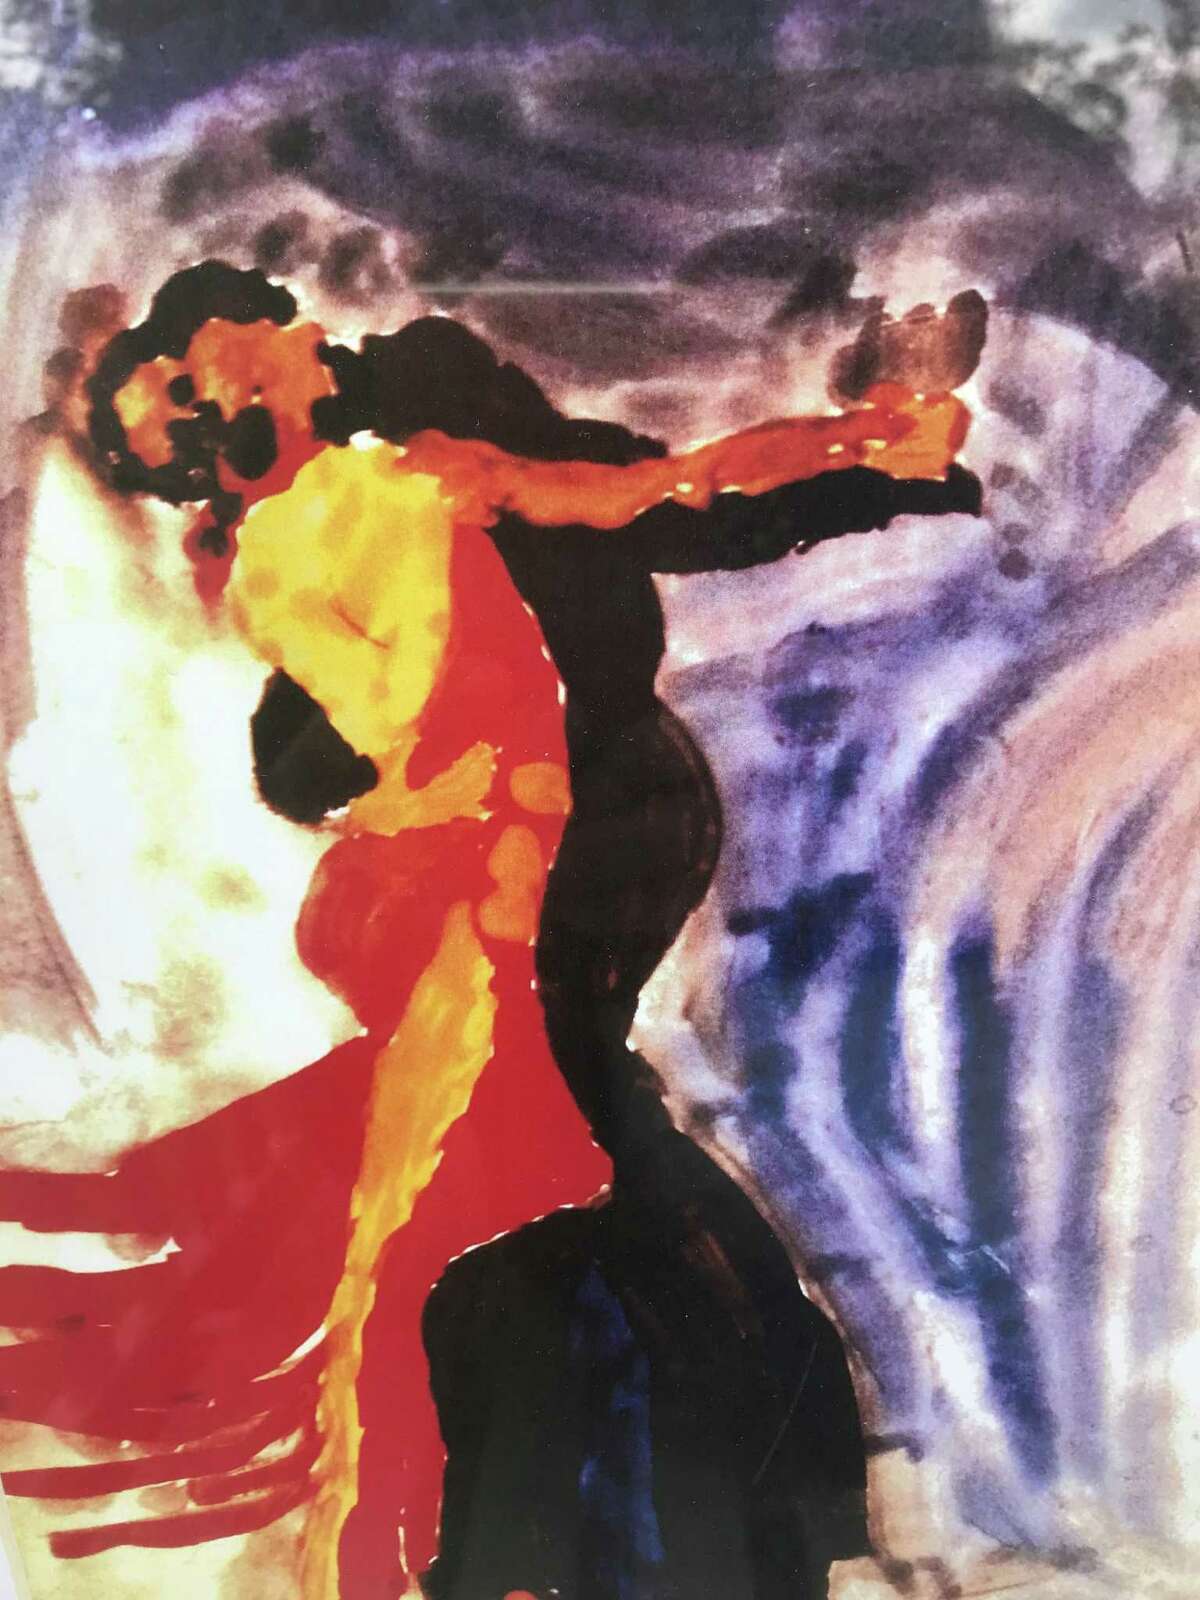 Barbara Constandaki’s water color painting of a man dancing with a woman.